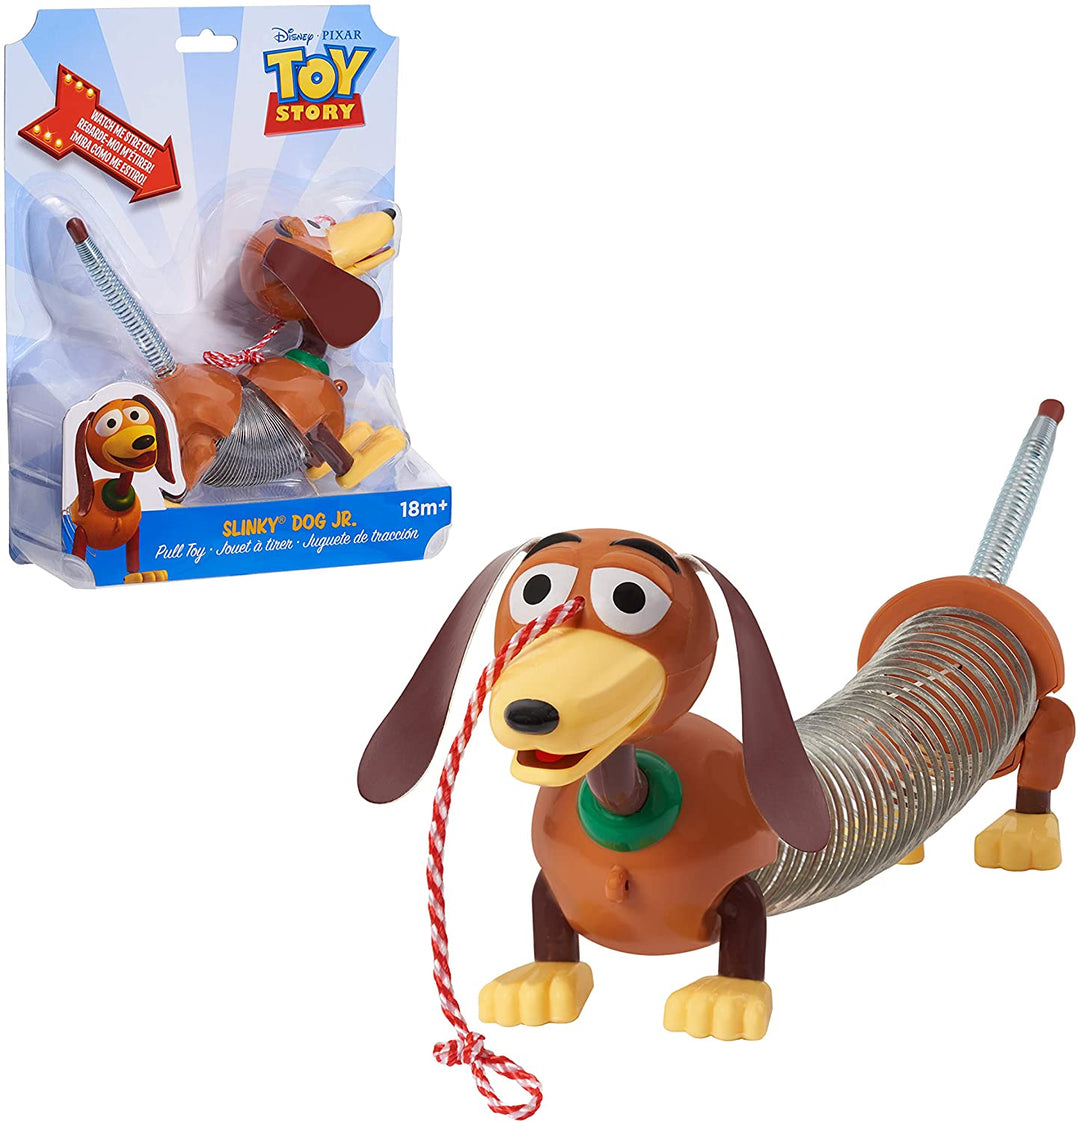 Toy Story 4 03240 Disney and Pixar Story Slinky Dog Jr Pull Toy, Multi-Color